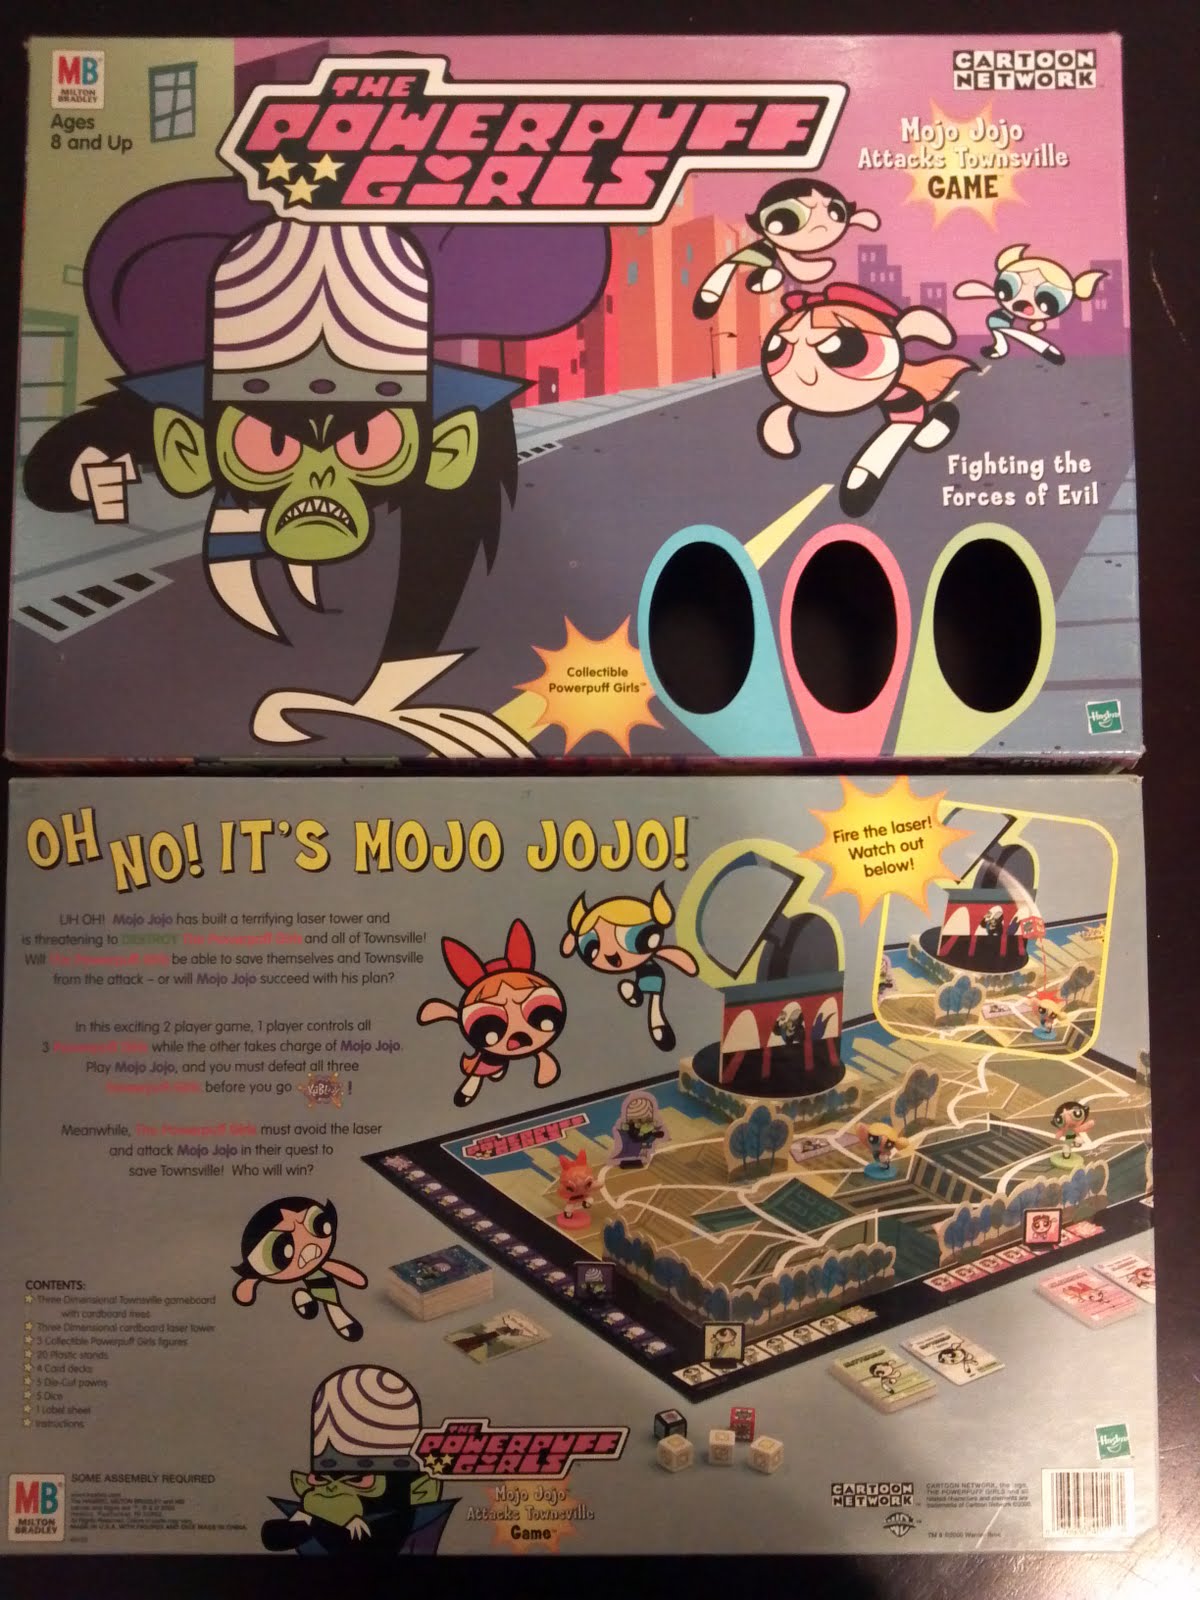 A Board Game A Day: The Powerpuff Girls Mojo Jojo Attacks Townsville